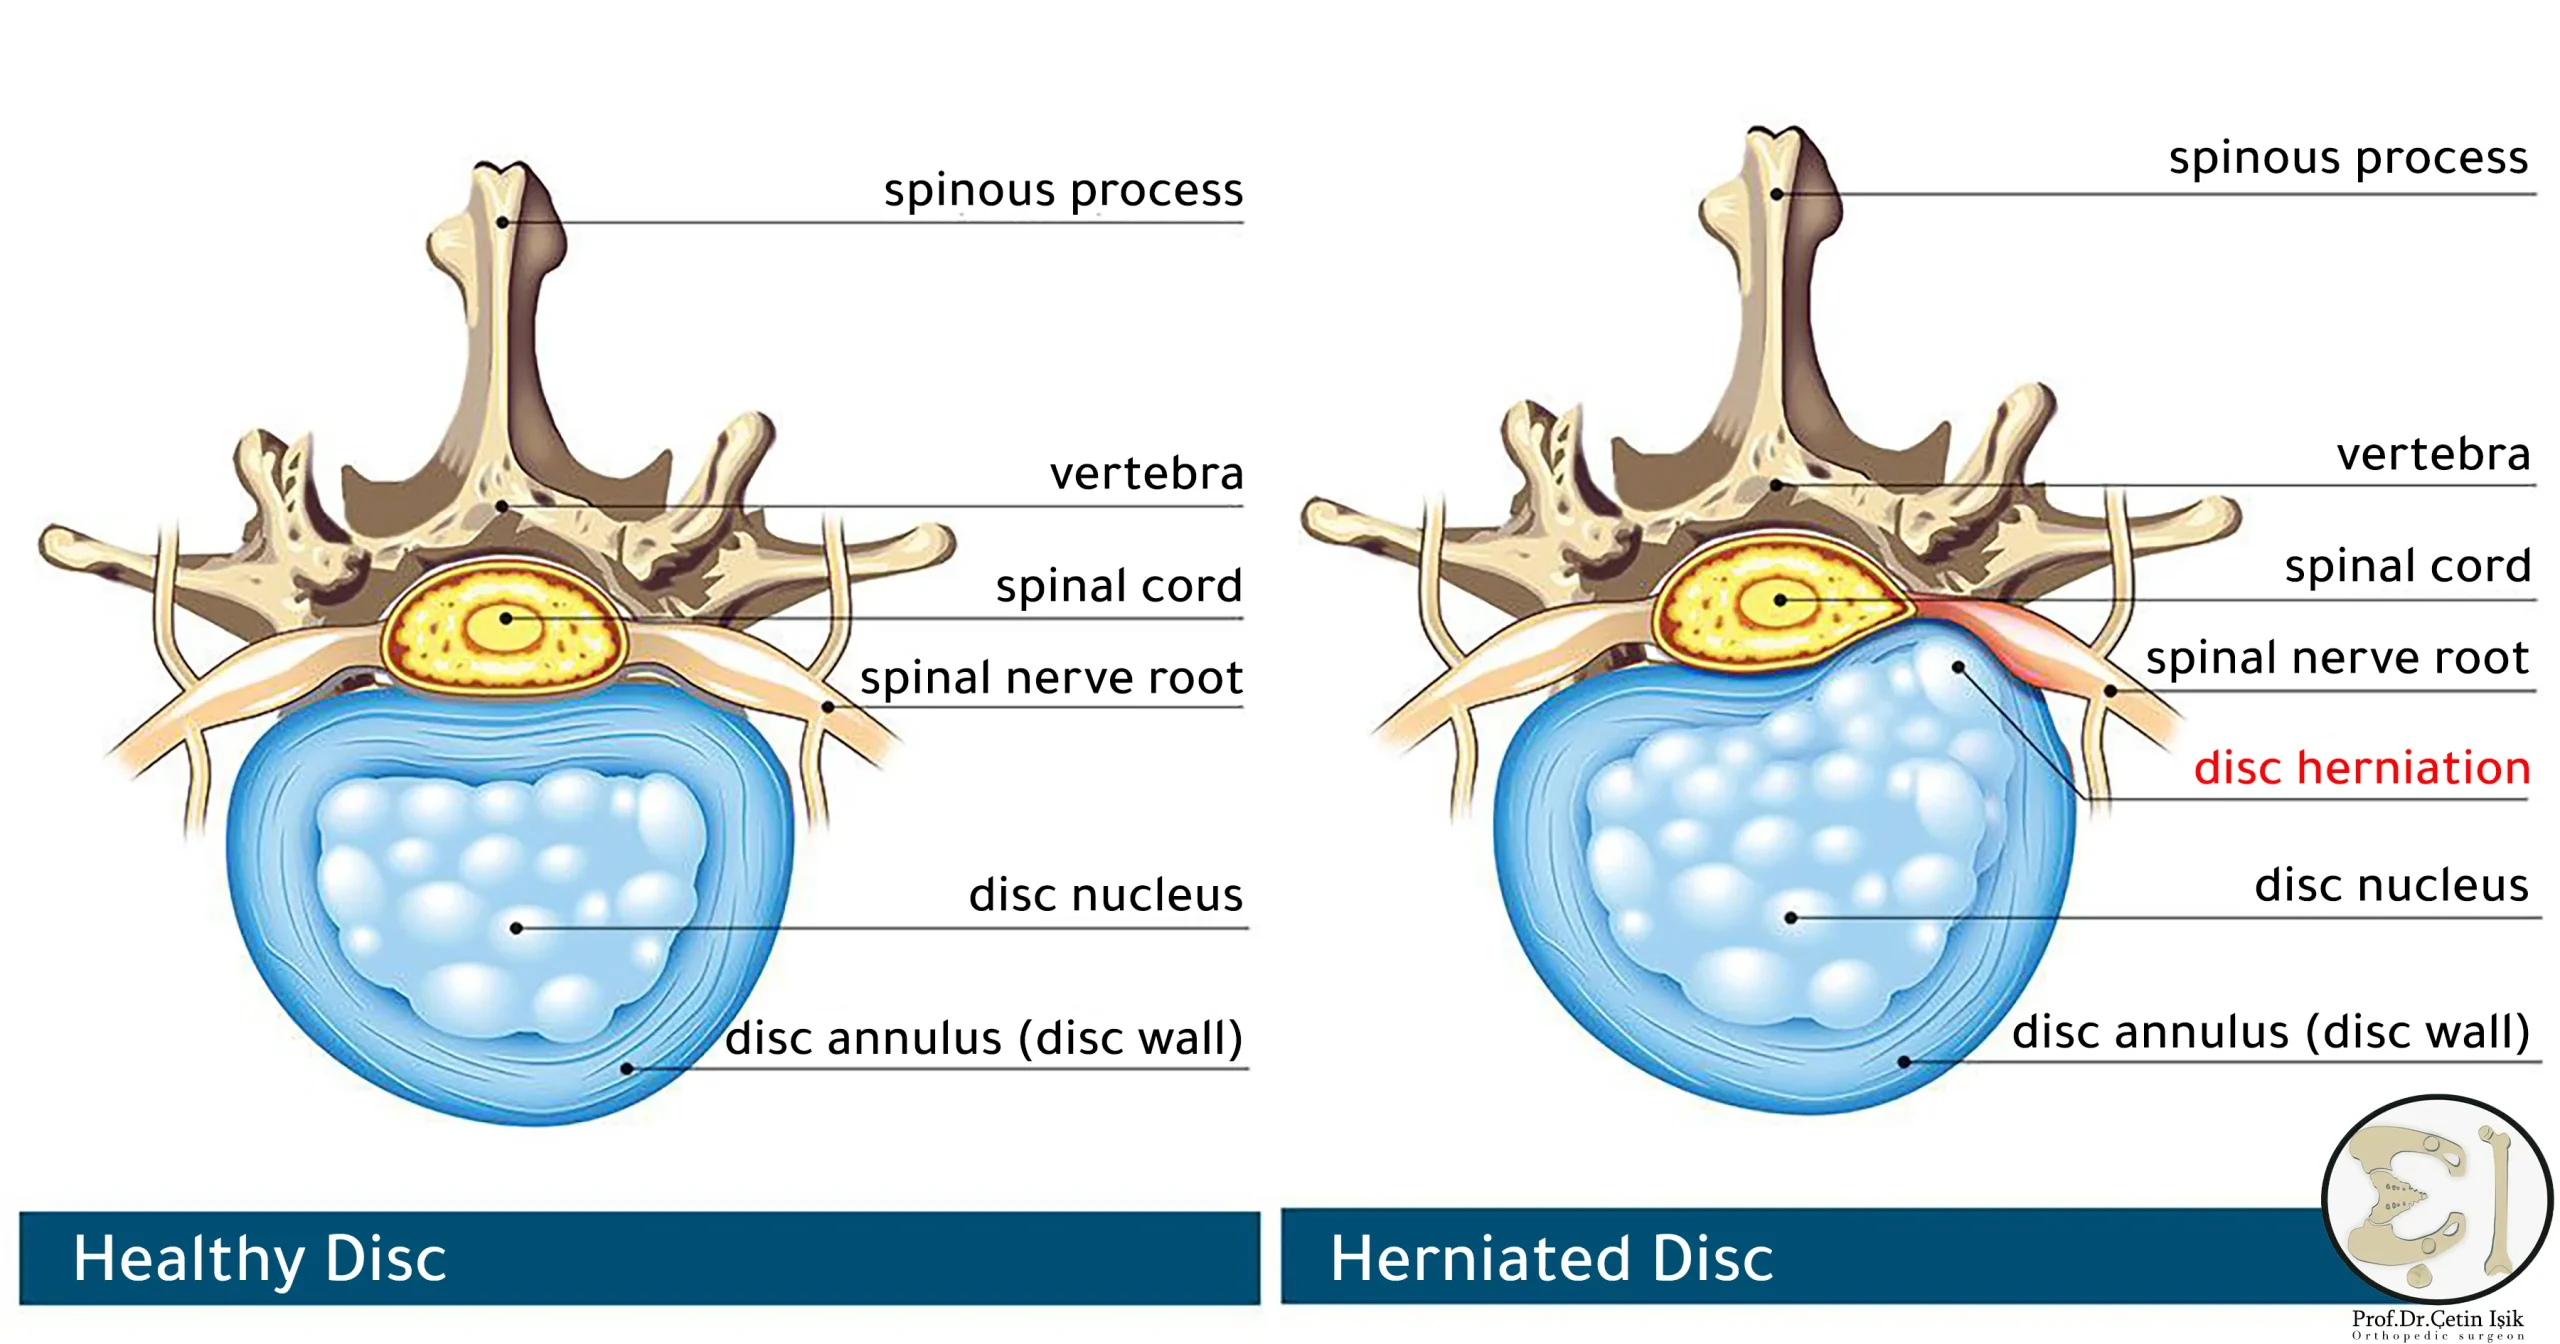 The difference between a herniated disc and a healthy disc, we note the protrusion of the nucleus of the disc outside the outer fibrous wall